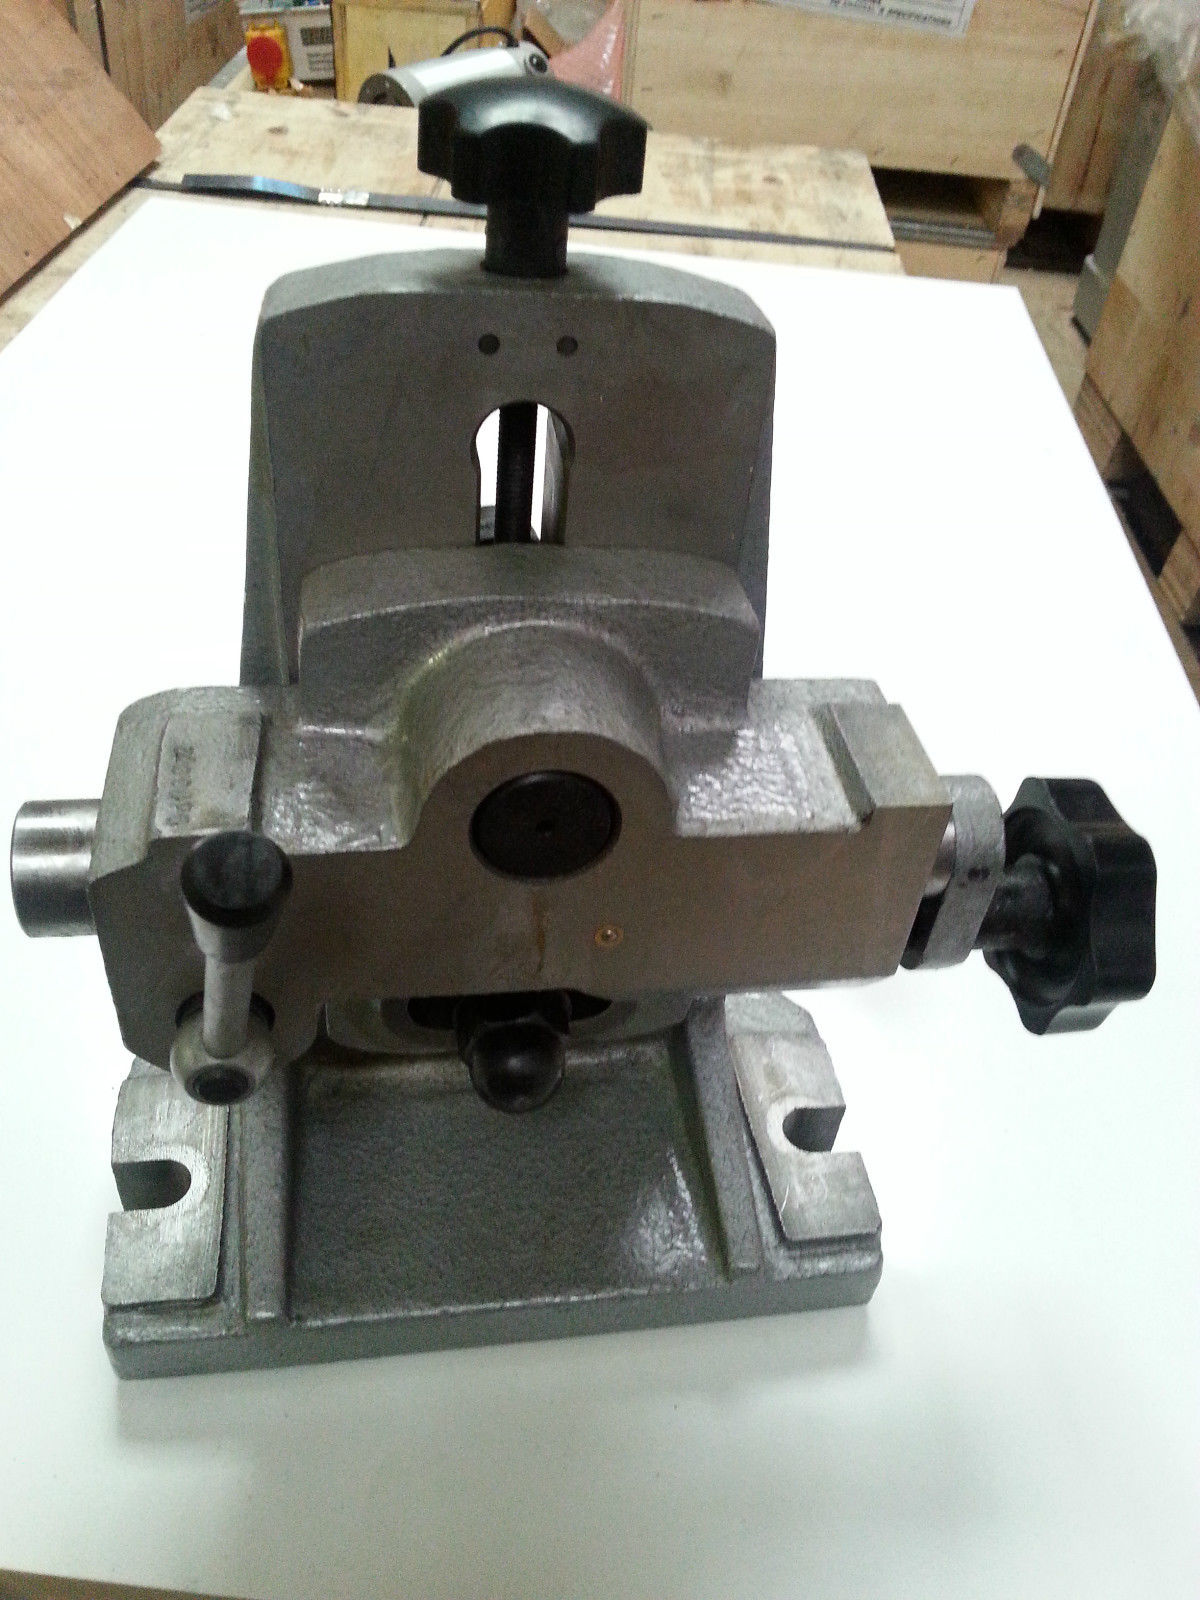 Amadeal Adjustable Tailstock 140-180mm Centre Height